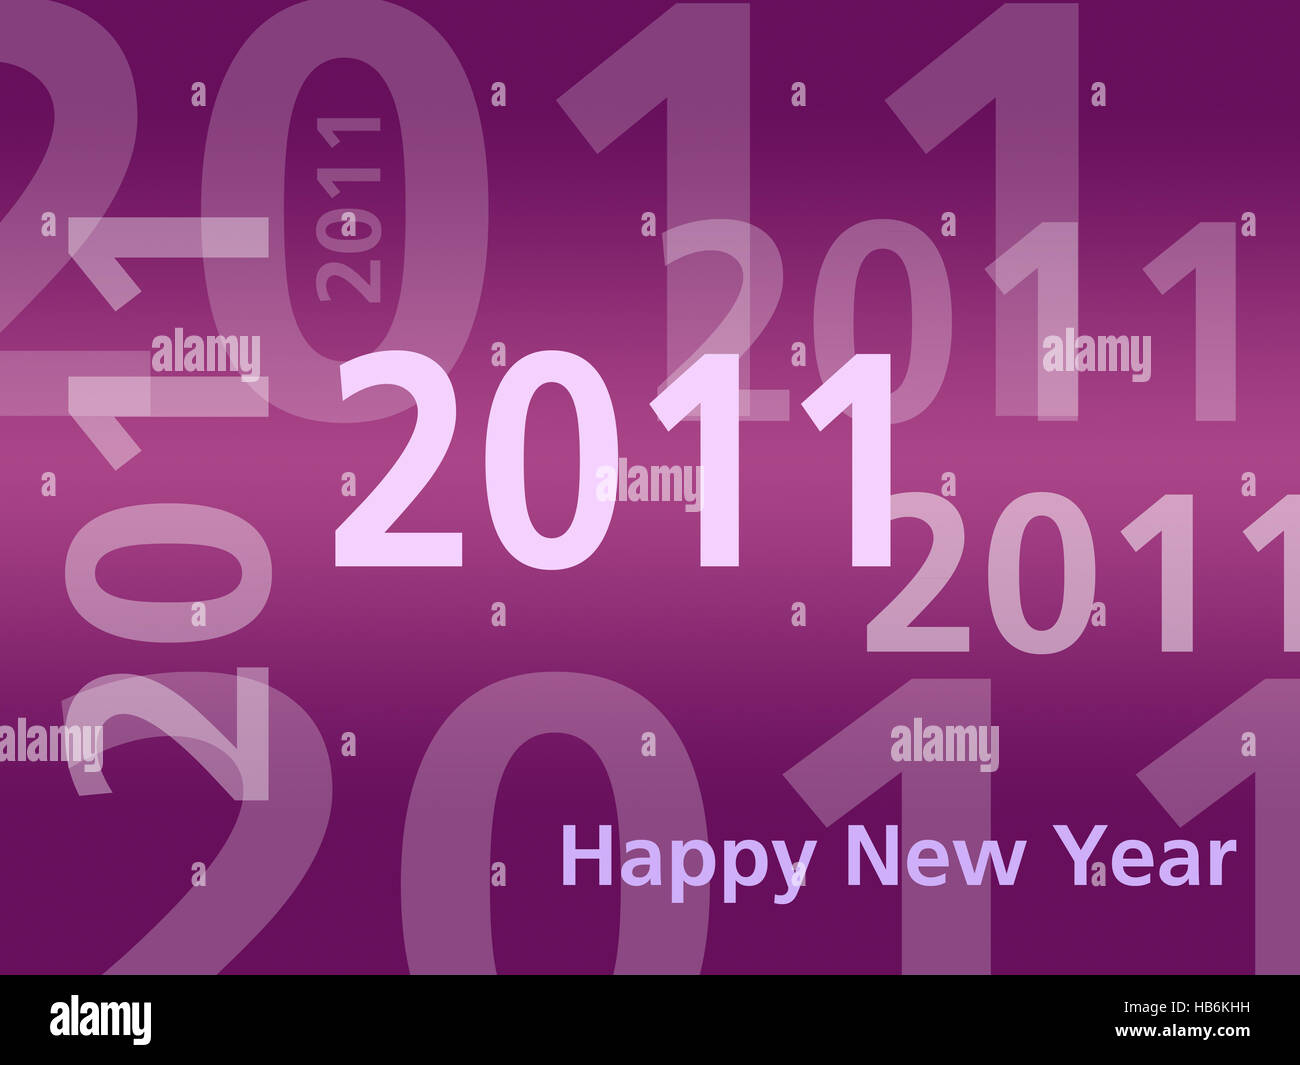 Happy New Year card  - 2011 - Pink Stock Photo